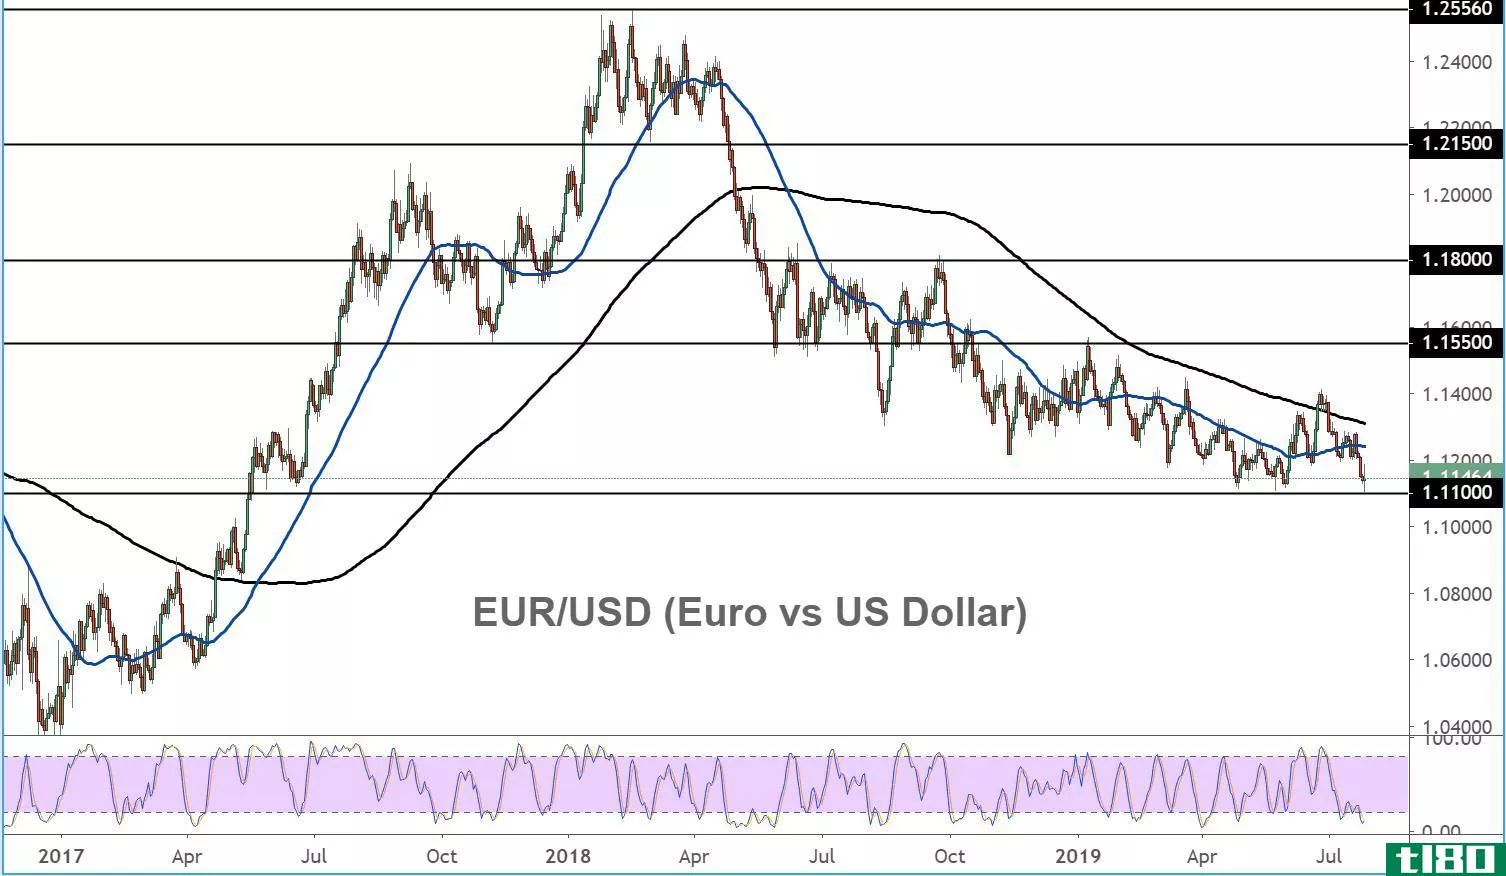 Chart showing the performance of the euro vs. the U.S. dollar